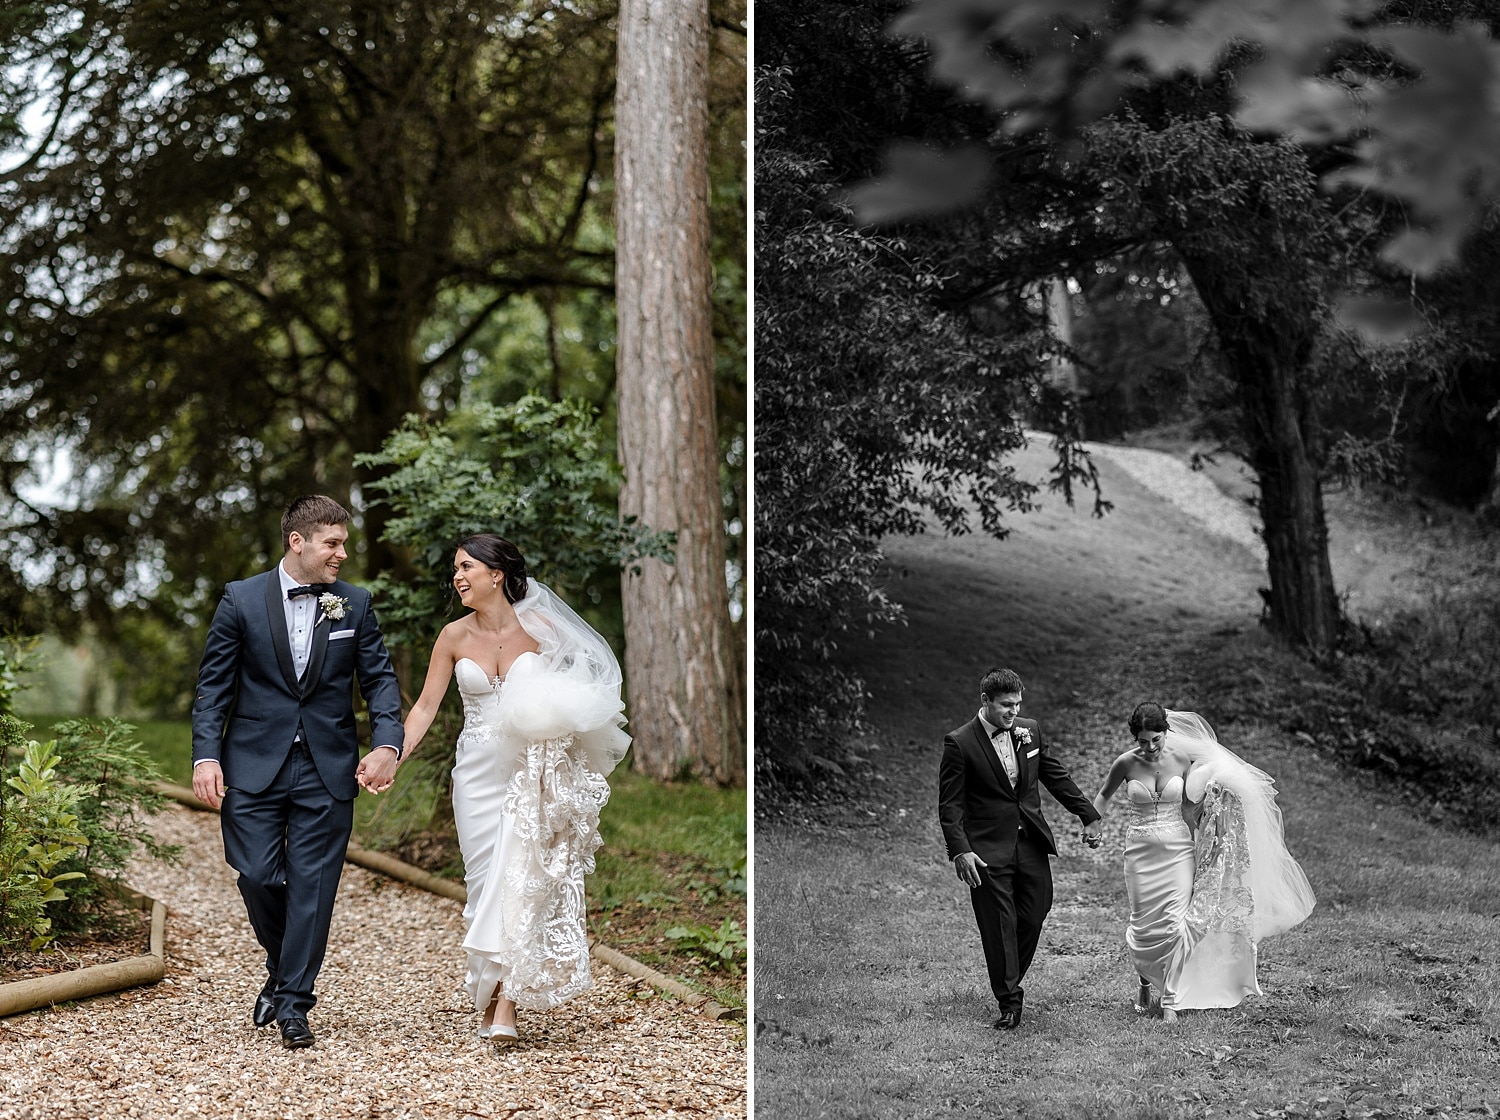 Wedding day portraits at Fairyhill, South Wales